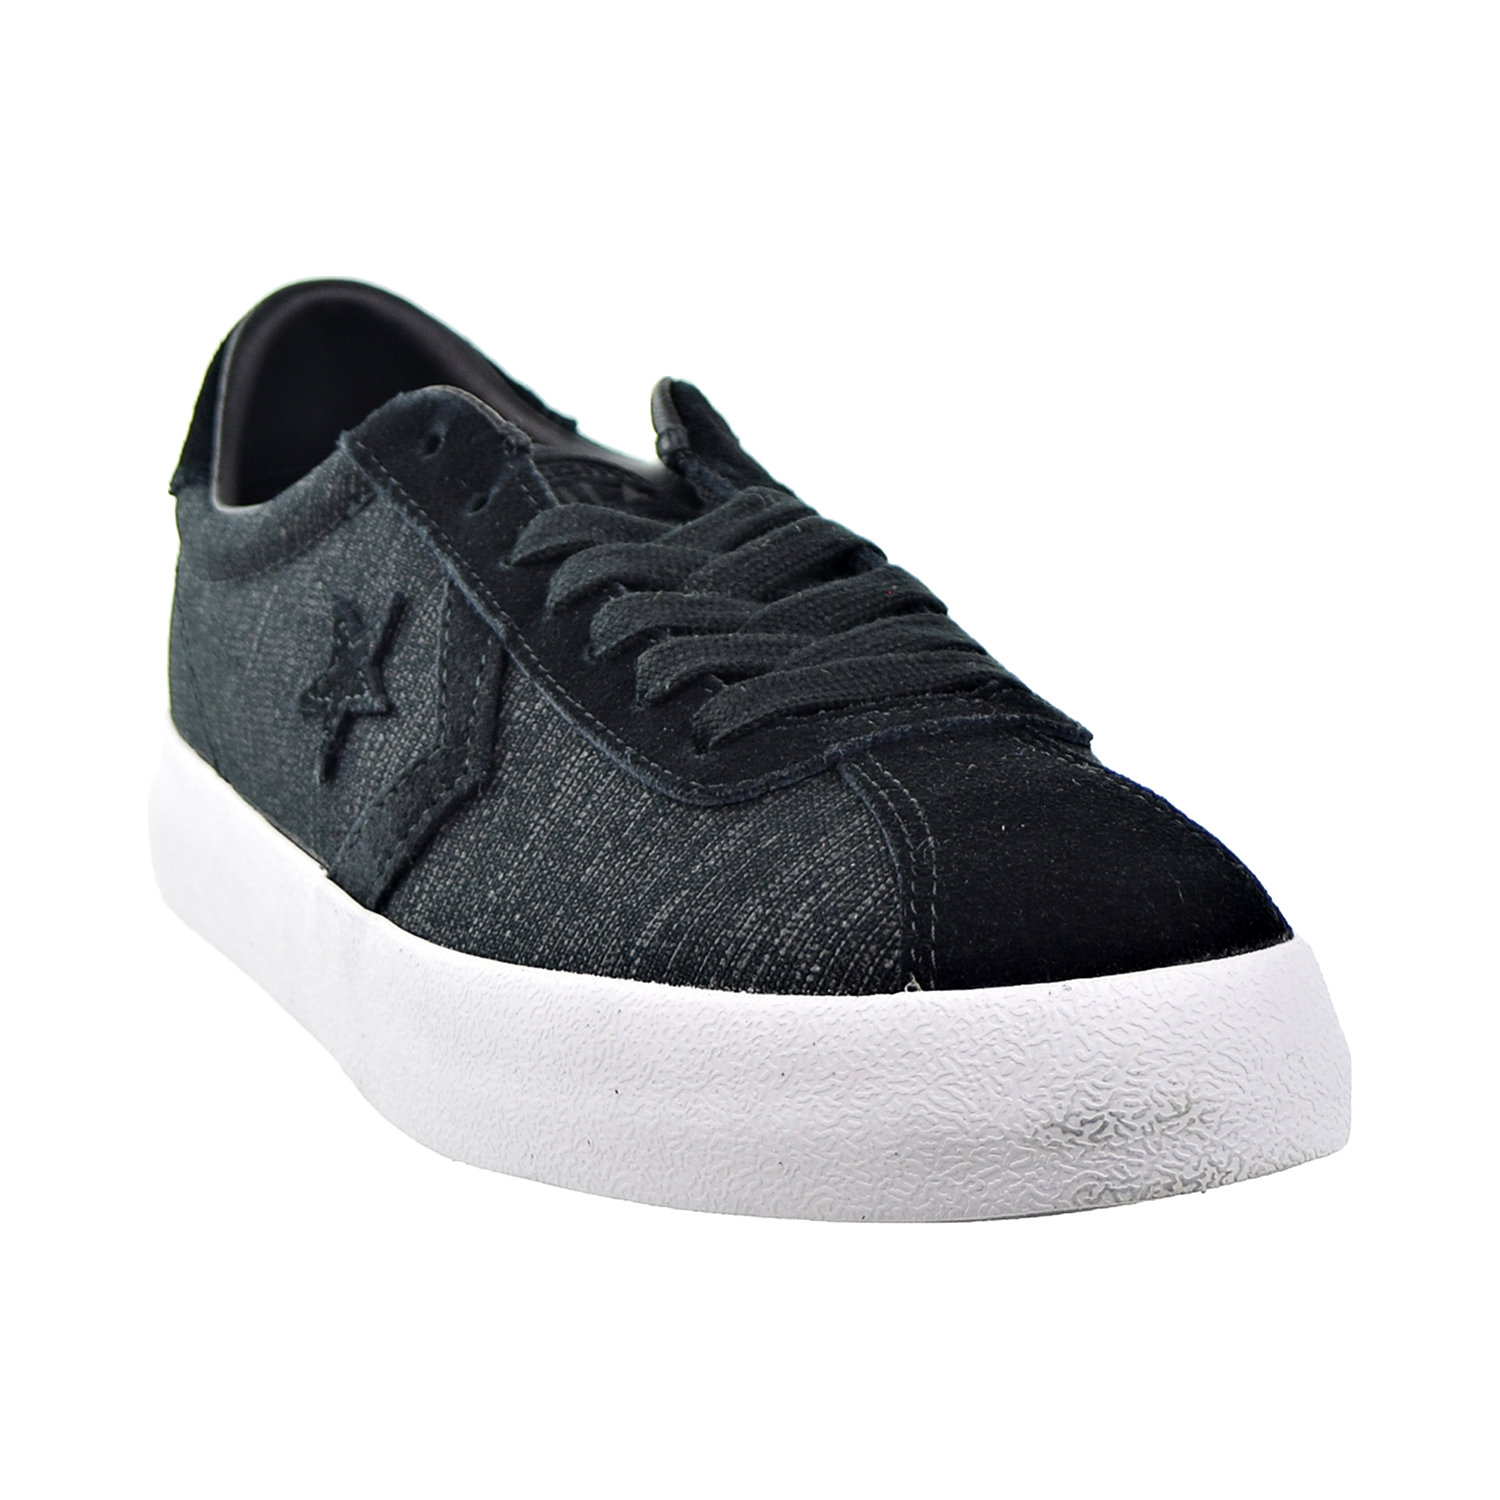 Converse Breakpoint OX Mens Shoes Black/White  155581c - image 2 of 6